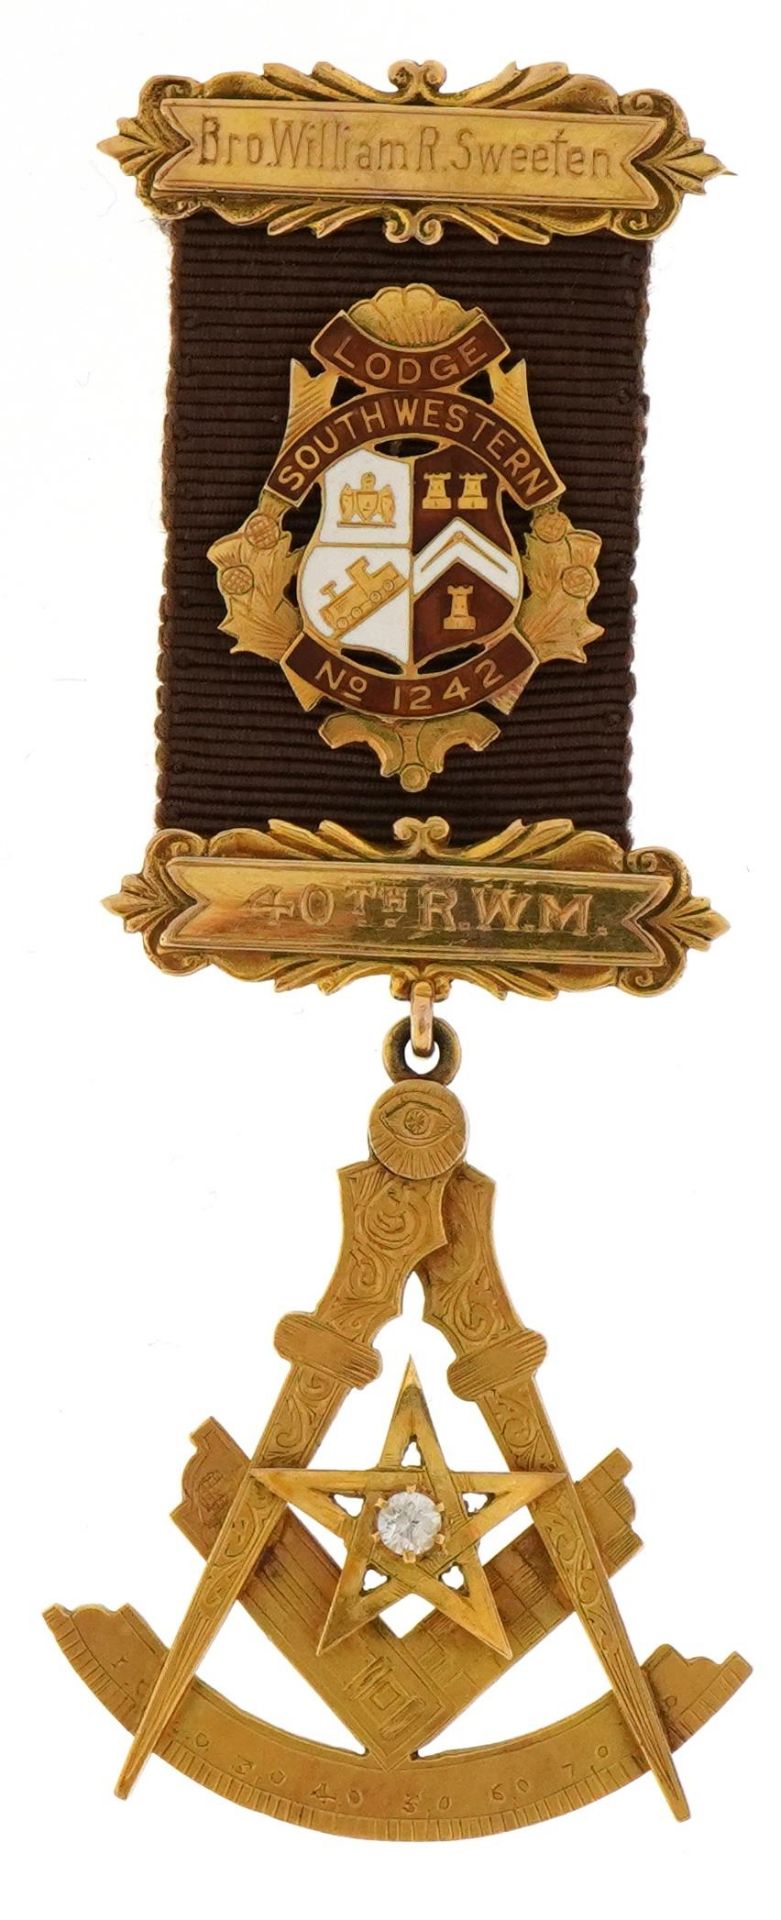 9ct gold and enamel South Western Lodge masonic jewel set with a diamond presented to Bro William